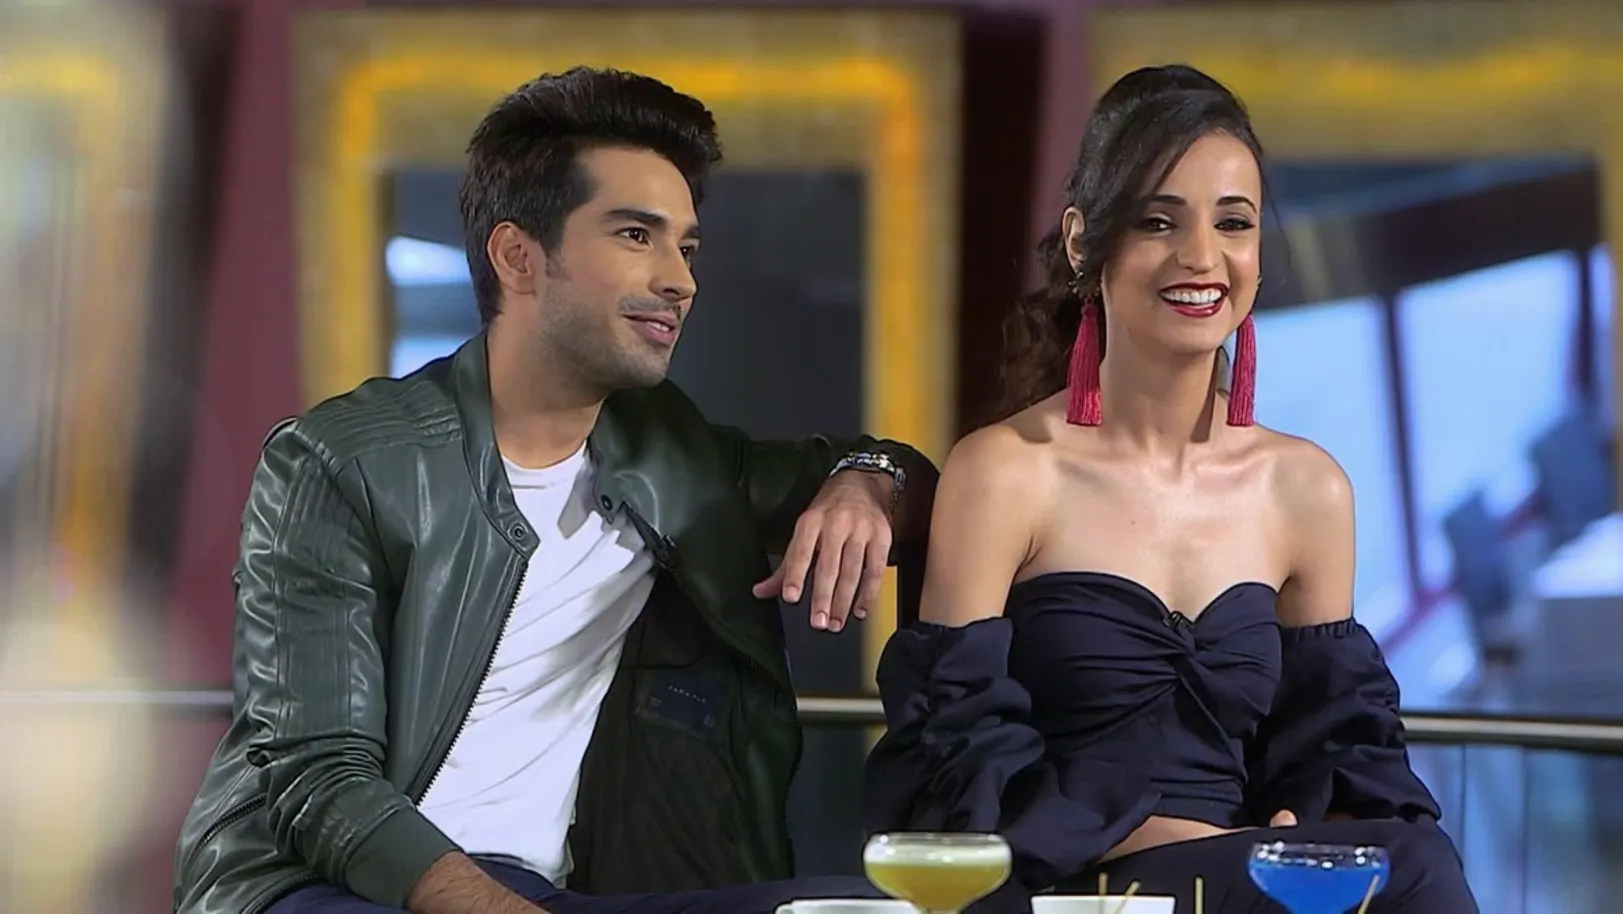 A Table For Two - Episode 6 - Sanaya Irani & Mohit Sehgal Episode 6